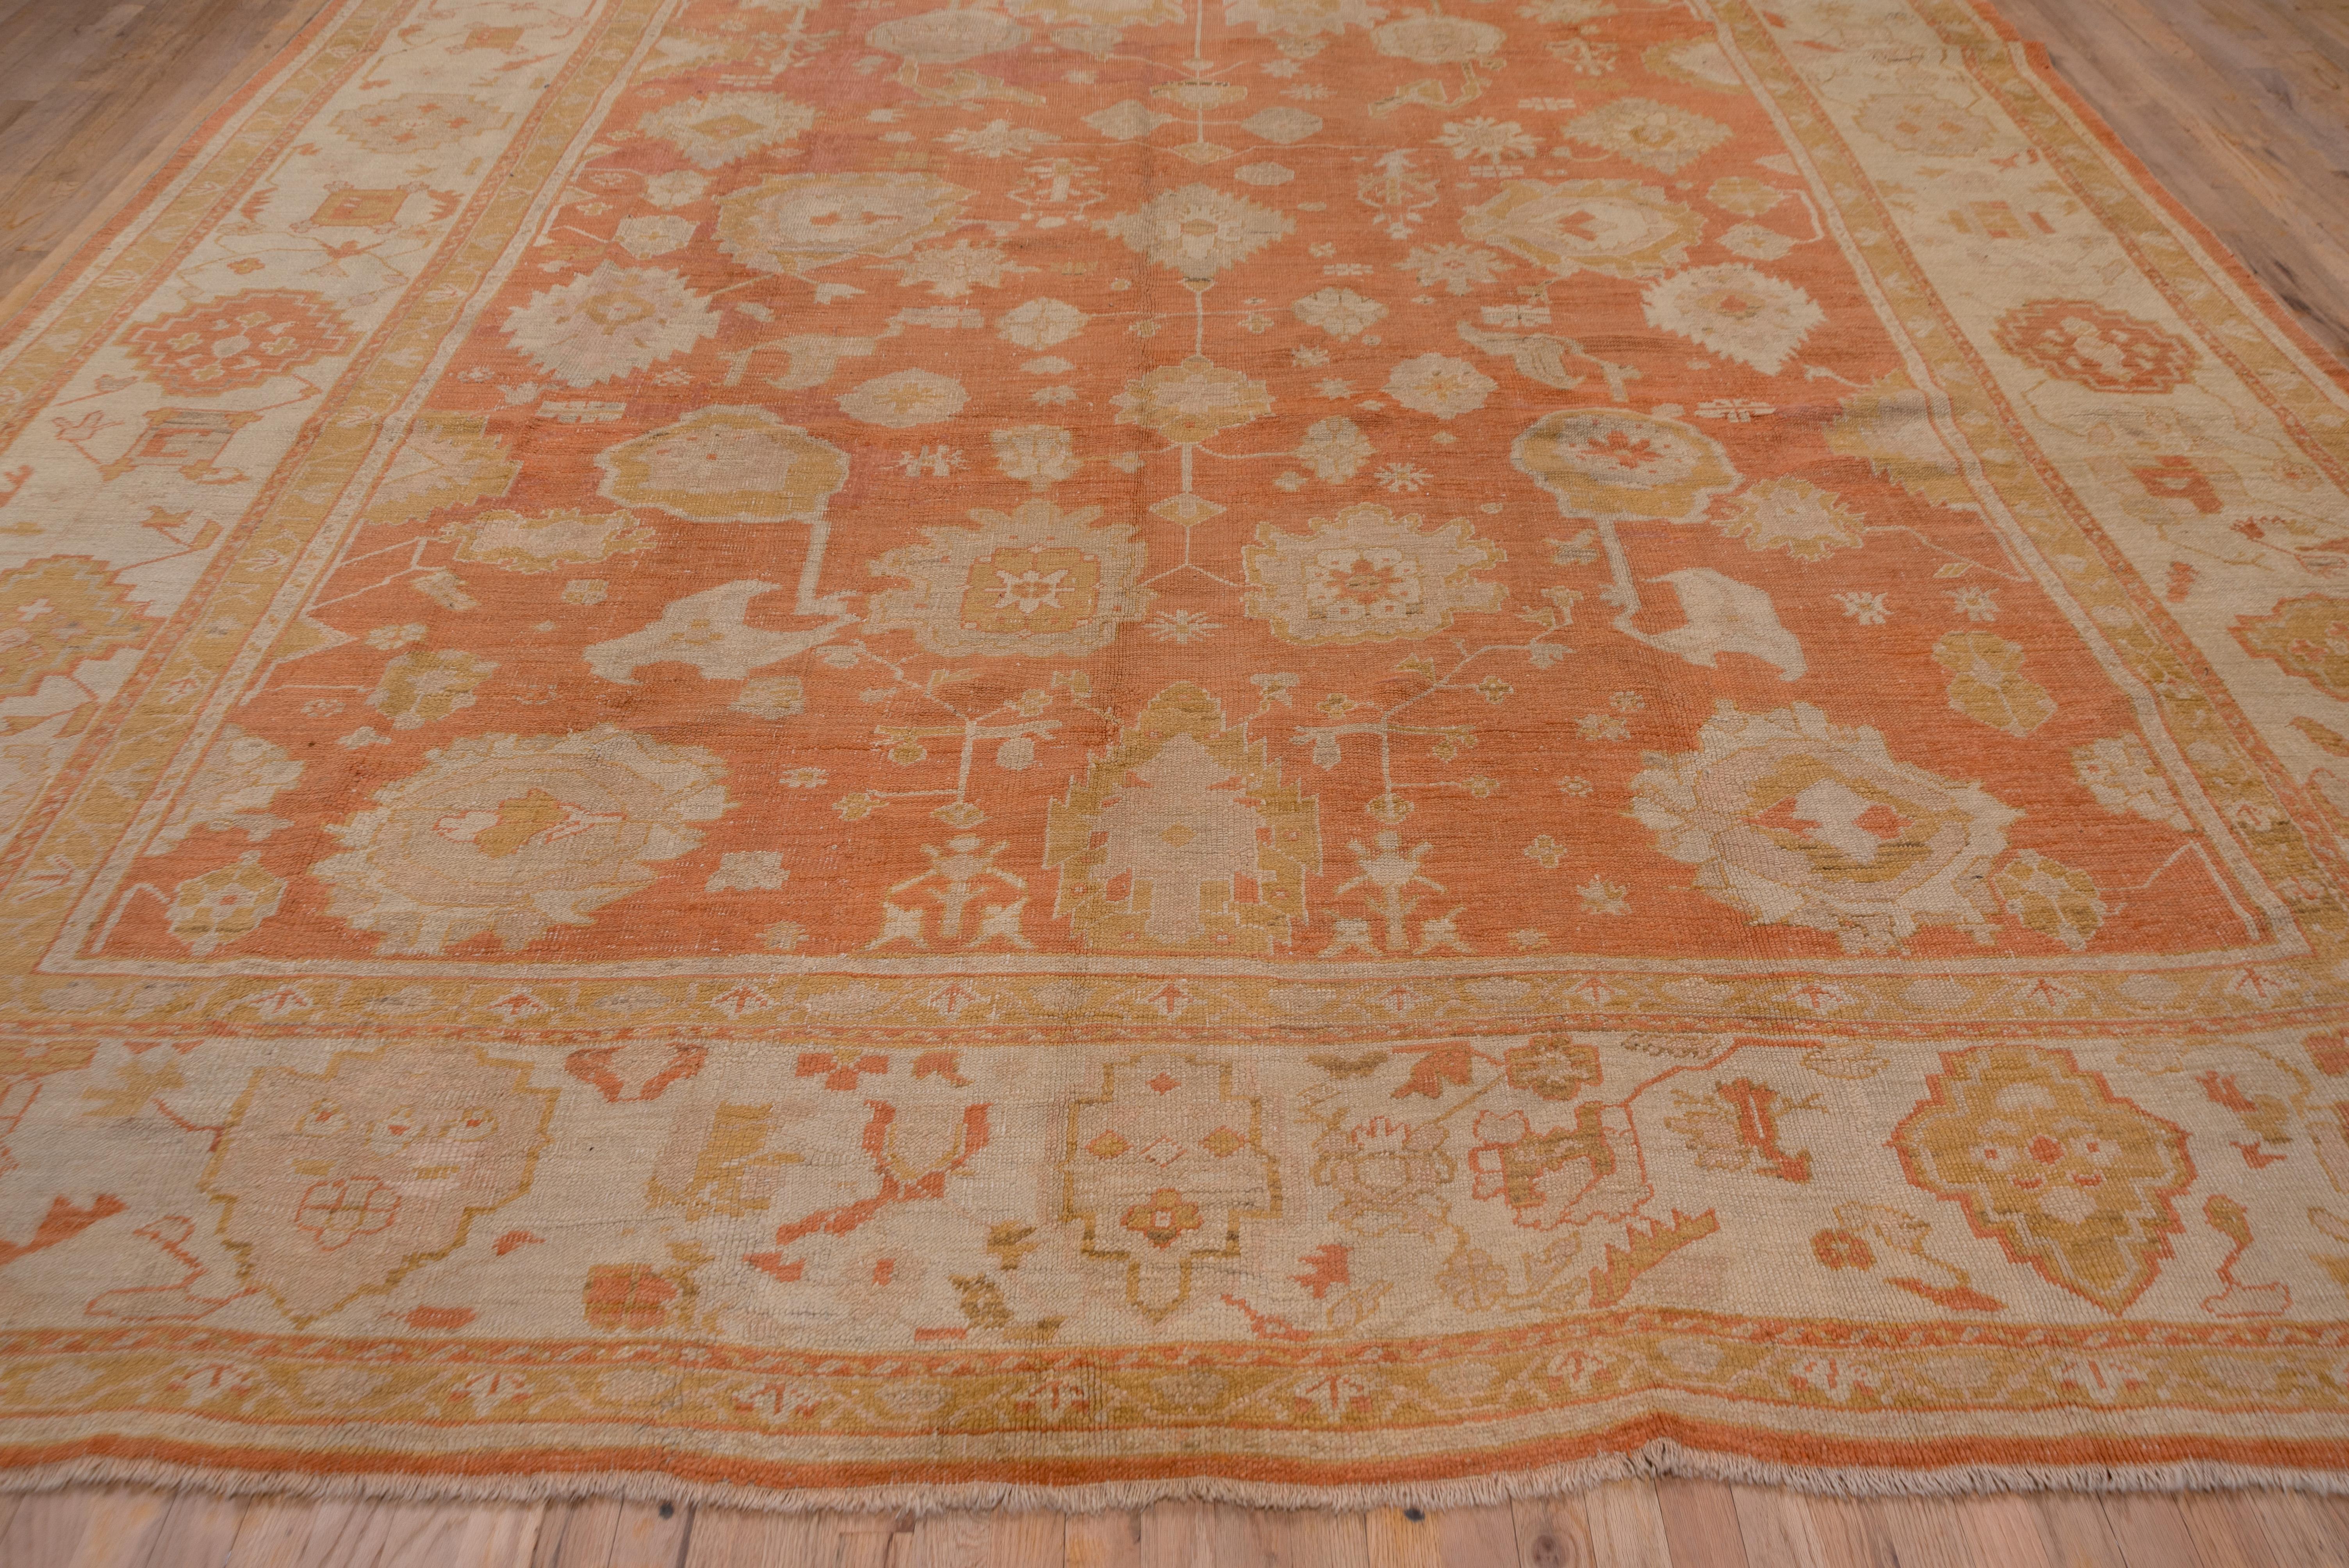 Hand-Knotted Antique Turkish Oushak Rug, Orange All-Over Field, Ivory Borders, circa 1900s For Sale